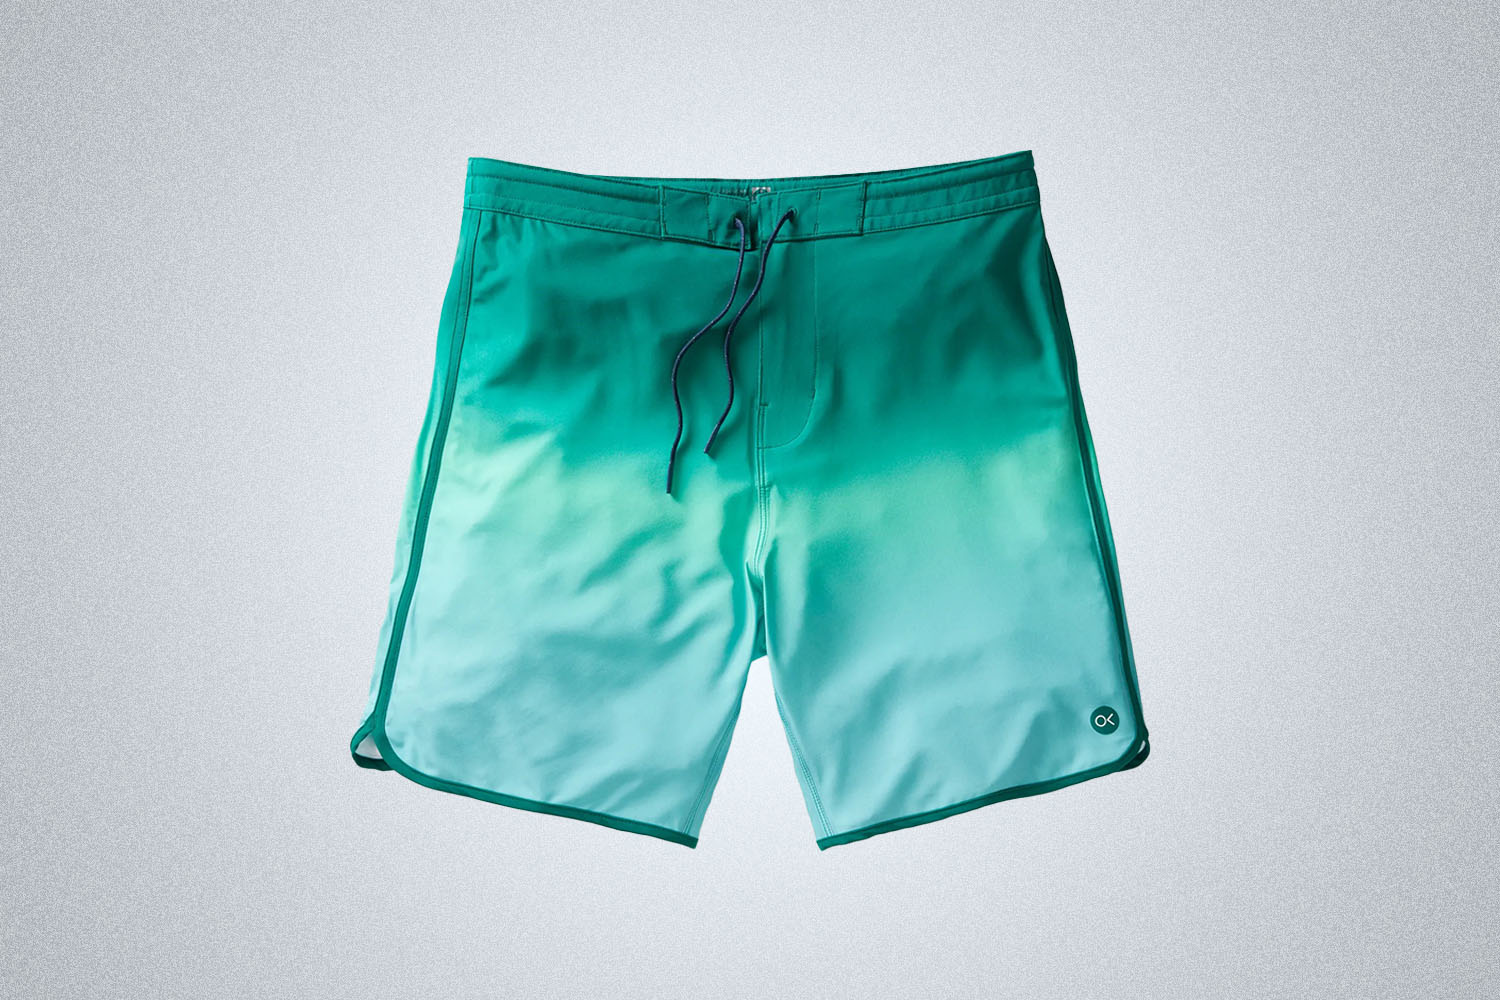 a pair of turquoise swim trunks from Outerknown on a grey background